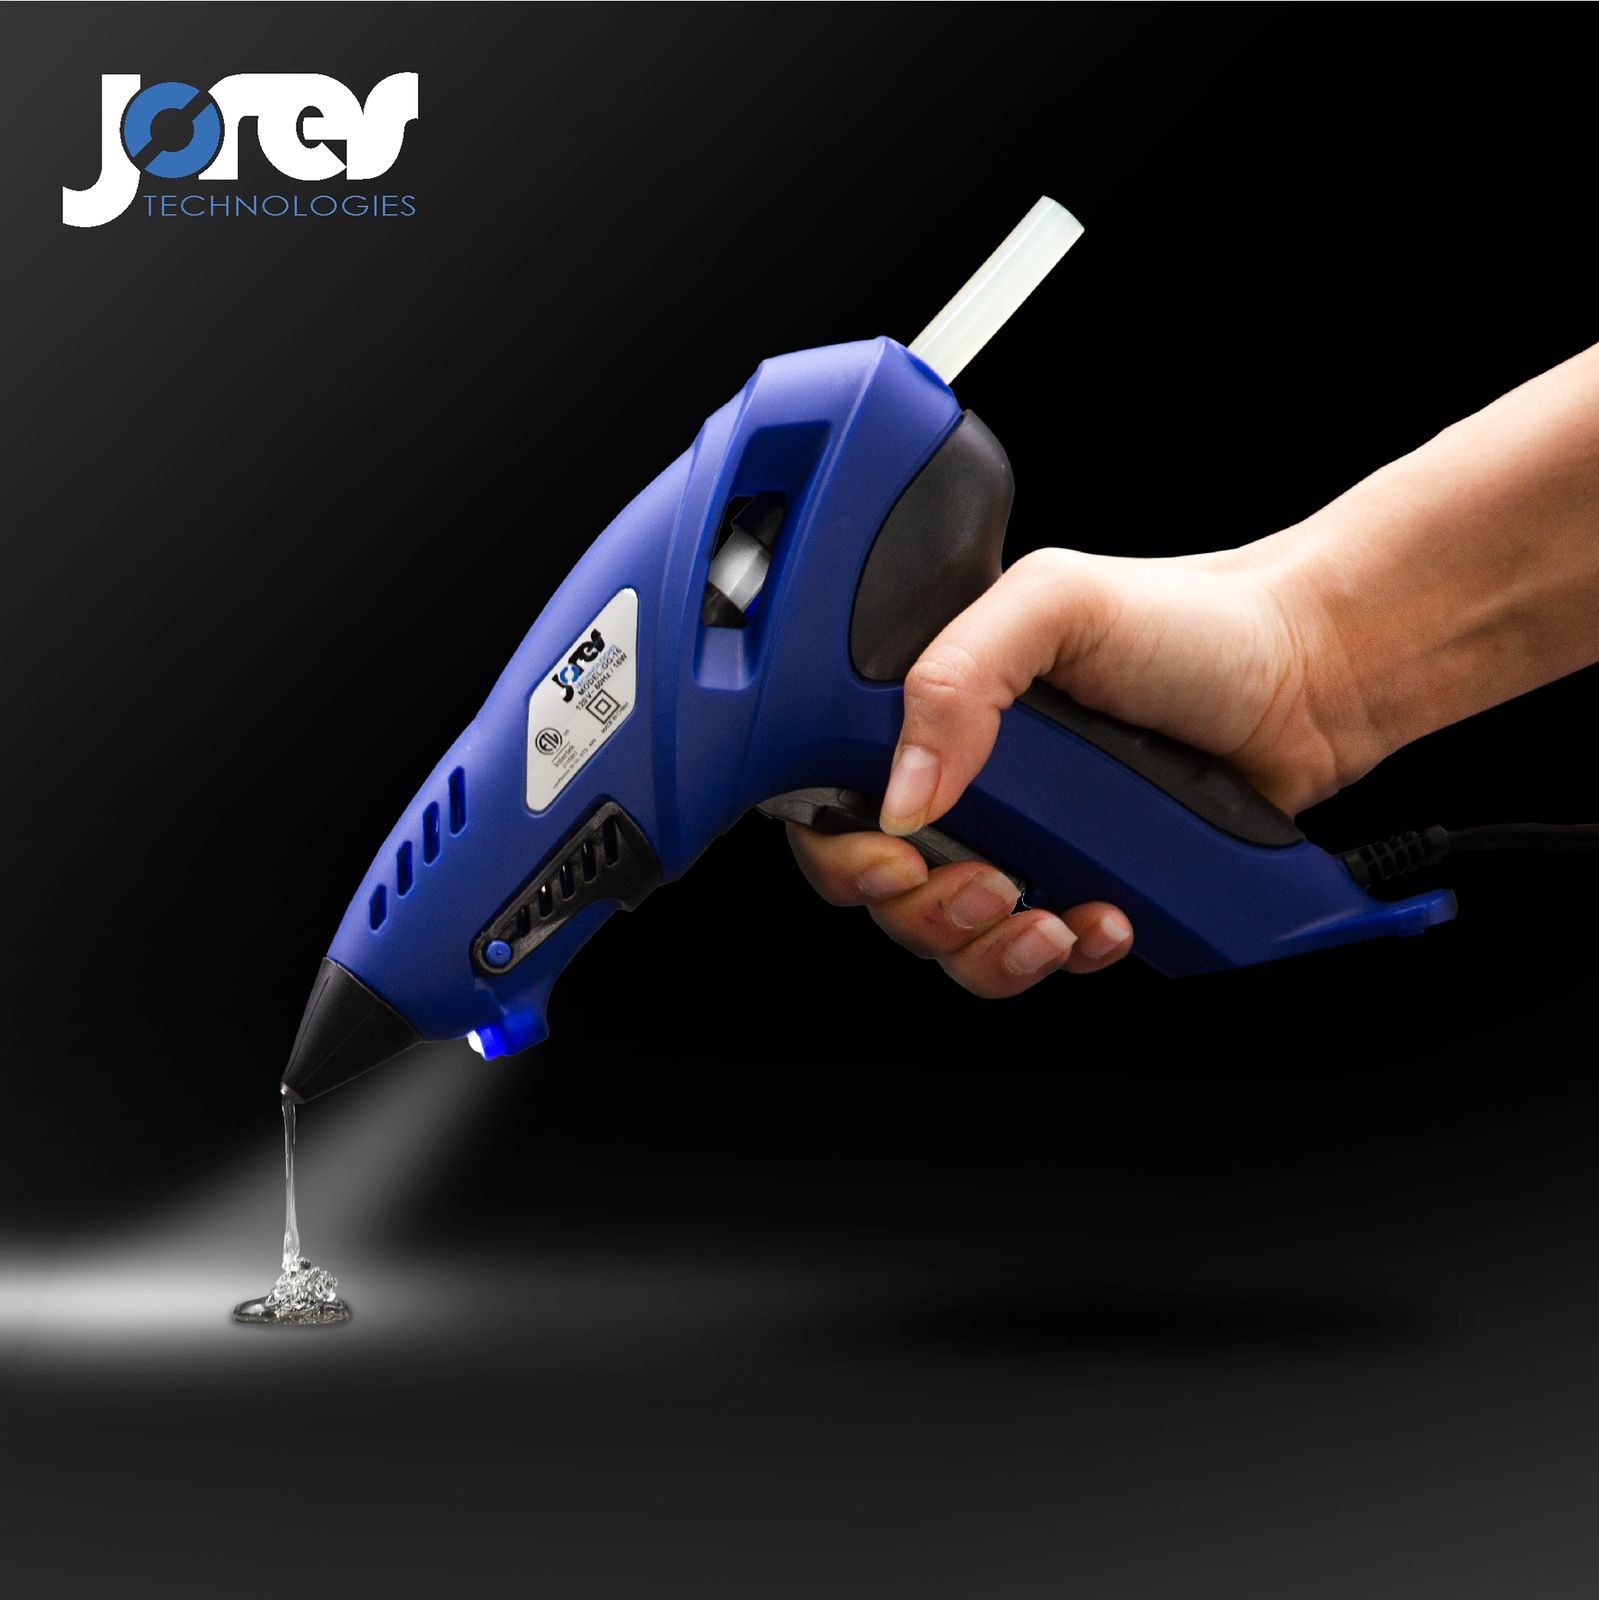 Operator using the light feature on glue gun by JORES TECHNOLOGIES®